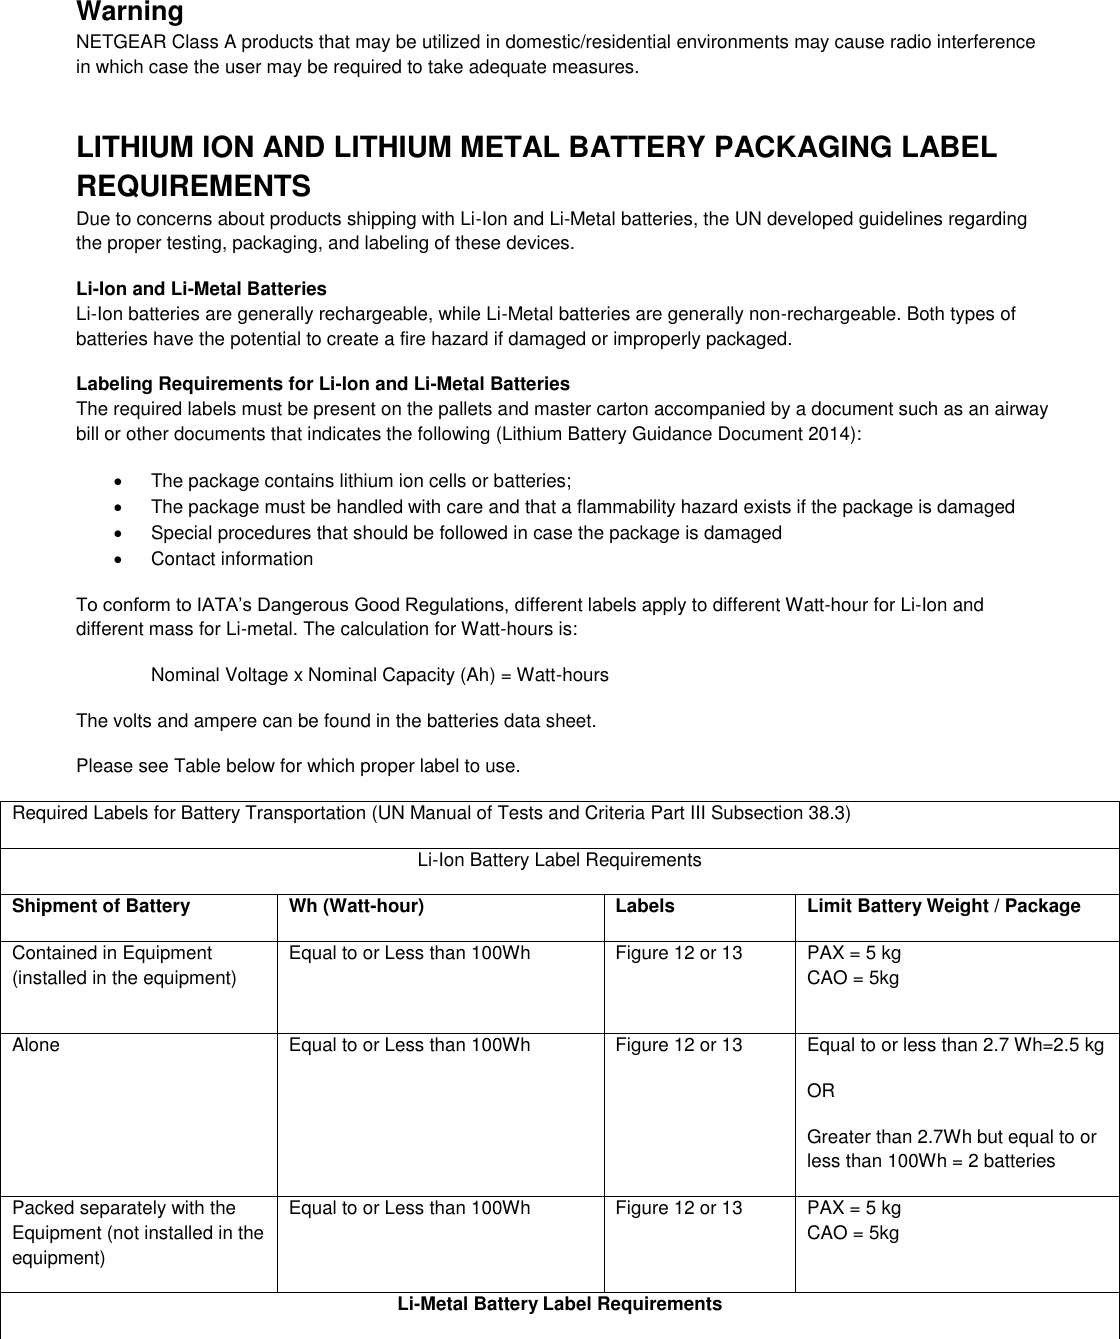  Warning NETGEAR Class A products that may be utilized in domestic/residential environments may cause radio interference in which case the user may be required to take adequate measures.  LITHIUM ION AND LITHIUM METAL BATTERY PACKAGING LABEL REQUIREMENTS  Due to concerns about products shipping with Li-Ion and Li-Metal batteries, the UN developed guidelines regarding the proper testing, packaging, and labeling of these devices.  Li-Ion and Li-Metal Batteries Li-Ion batteries are generally rechargeable, while Li-Metal batteries are generally non-rechargeable. Both types of batteries have the potential to create a fire hazard if damaged or improperly packaged.  Labeling Requirements for Li-Ion and Li-Metal Batteries The required labels must be present on the pallets and master carton accompanied by a document such as an airway bill or other documents that indicates the following (Lithium Battery Guidance Document 2014):   The package contains lithium ion cells or batteries;   The package must be handled with care and that a flammability hazard exists if the package is damaged   Special procedures that should be followed in case the package is damaged   Contact information To conform to IATA’s Dangerous Good Regulations, different labels apply to different Watt-hour for Li-Ion and different mass for Li-metal. The calculation for Watt-hours is: Nominal Voltage x Nominal Capacity (Ah) = Watt-hours The volts and ampere can be found in the batteries data sheet. Please see Table below for which proper label to use. Required Labels for Battery Transportation (UN Manual of Tests and Criteria Part III Subsection 38.3) Li-Ion Battery Label Requirements Shipment of Battery Wh (Watt-hour) Labels Limit Battery Weight / Package Contained in Equipment (installed in the equipment) Equal to or Less than 100Wh  Figure 12 or 13  PAX = 5 kg CAO = 5kg Alone  Equal to or Less than 100Wh  Figure 12 or 13  Equal to or less than 2.7 Wh=2.5 kg OR Greater than 2.7Wh but equal to or less than 100Wh = 2 batteries Packed separately with the Equipment (not installed in the equipment) Equal to or Less than 100Wh Figure 12 or 13  PAX = 5 kg CAO = 5kg Li-Metal Battery Label Requirements 